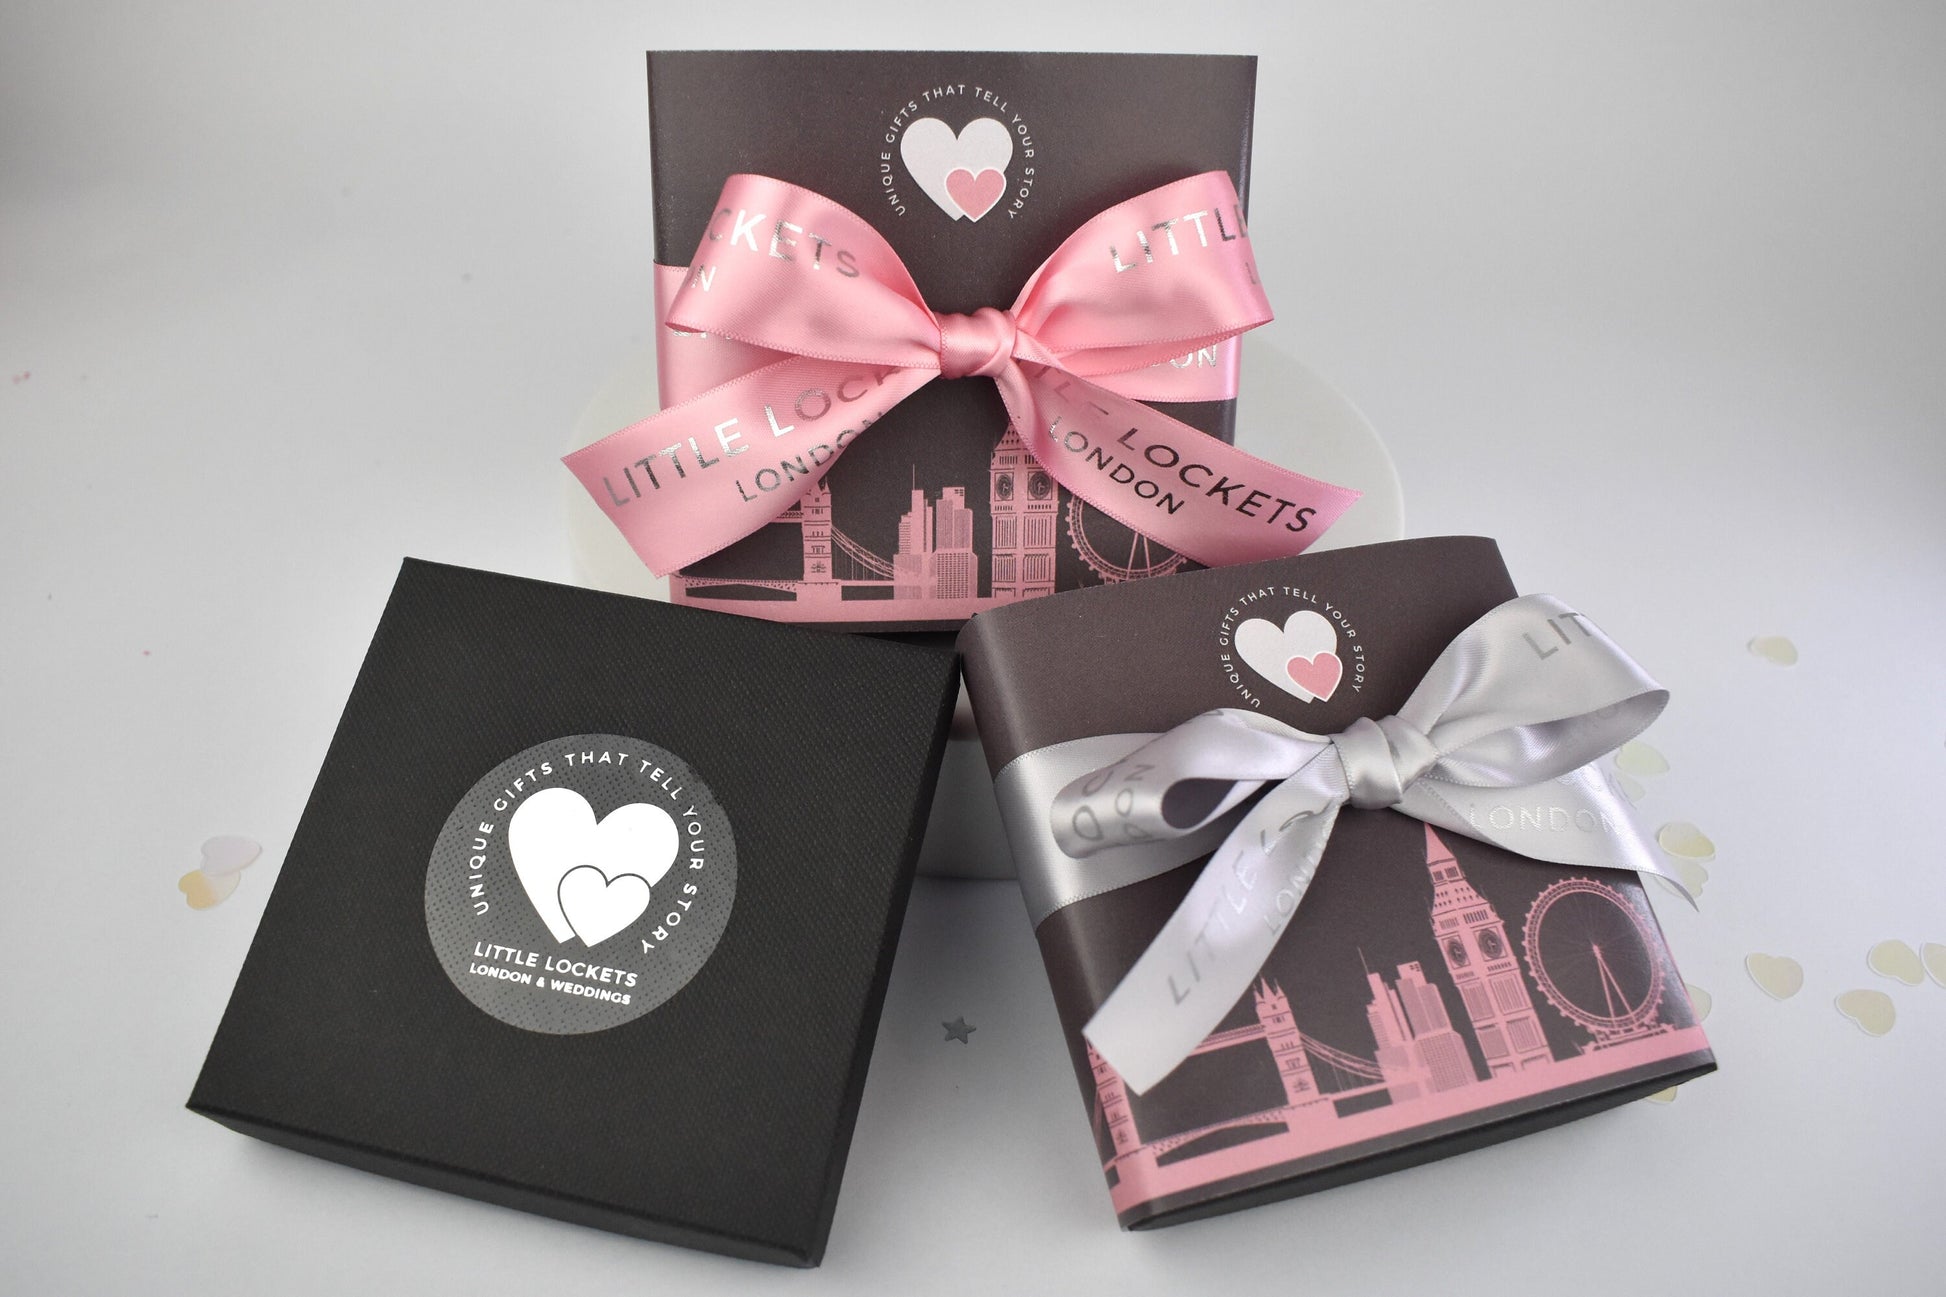 Your gift will arrive in a gift box with the  Little Lockets London logo. Alternatively, upgrade to luxury gift wrapping with a wrap of the London skyline and a hand tied bow in pink or grey.